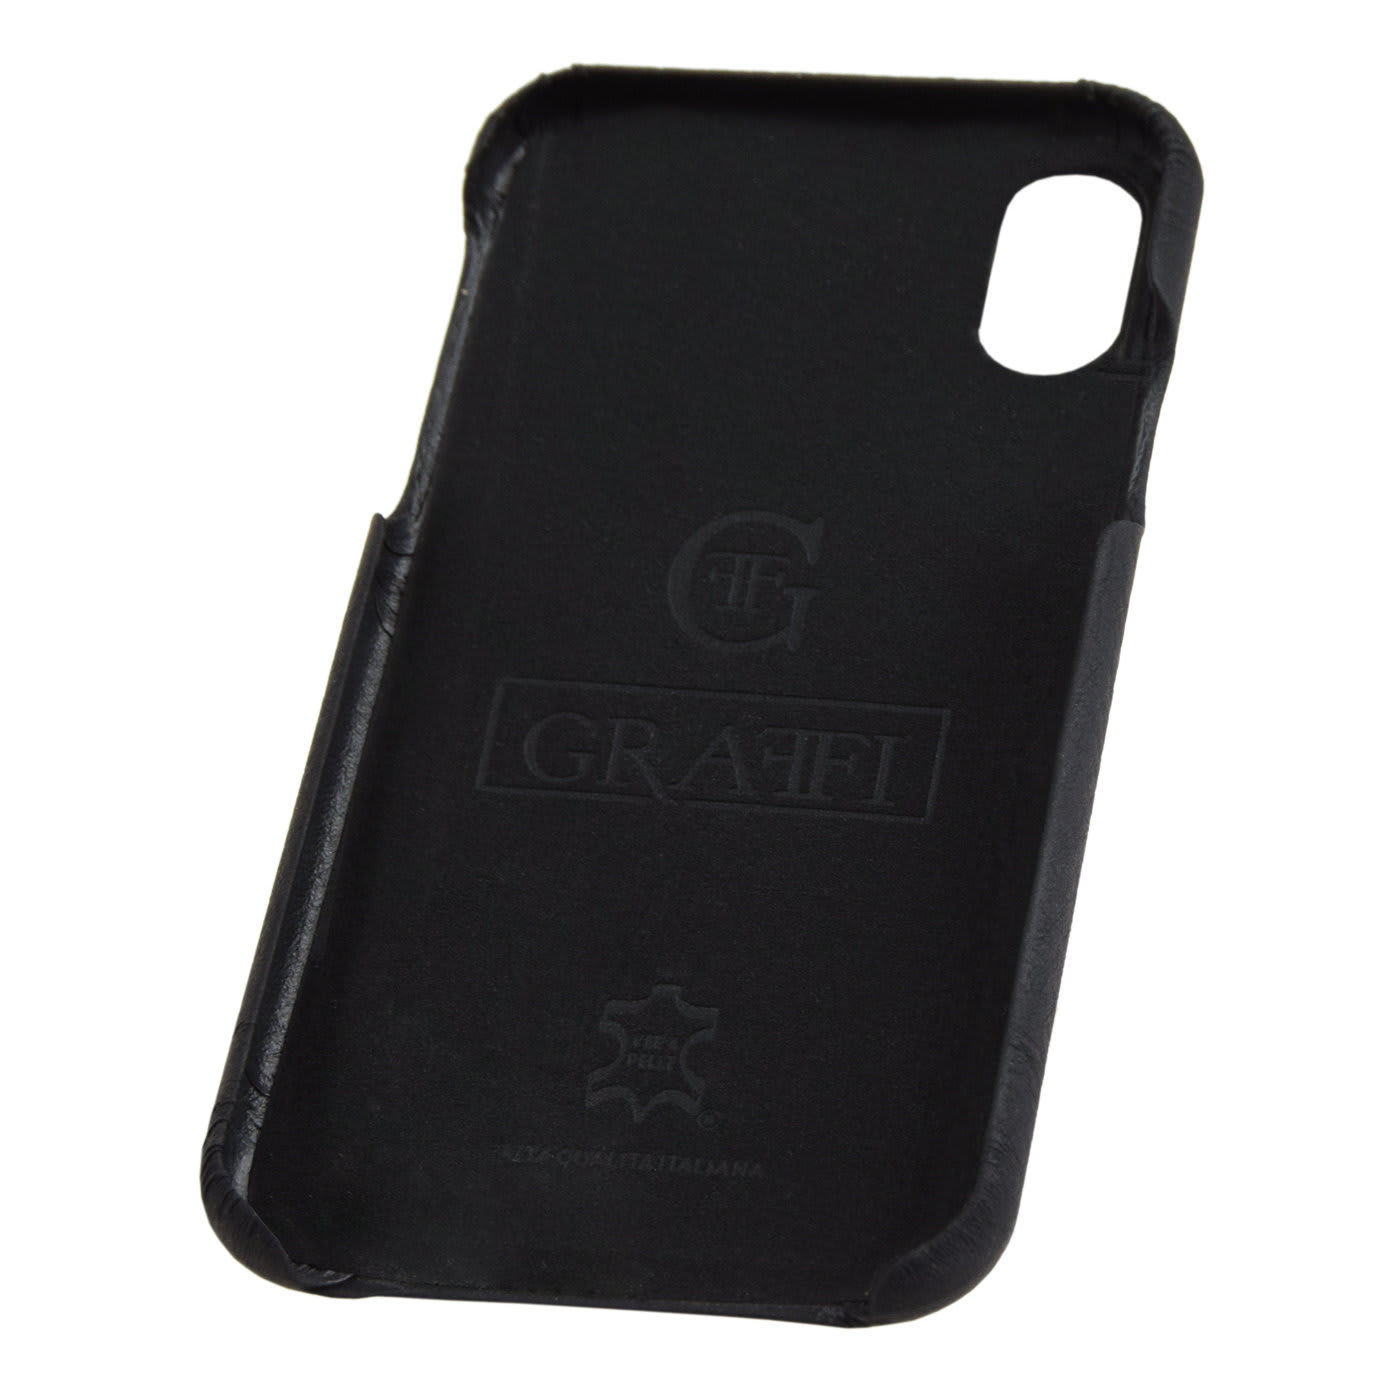 Vacchetta Black Leather Shell Cover - Carastyle